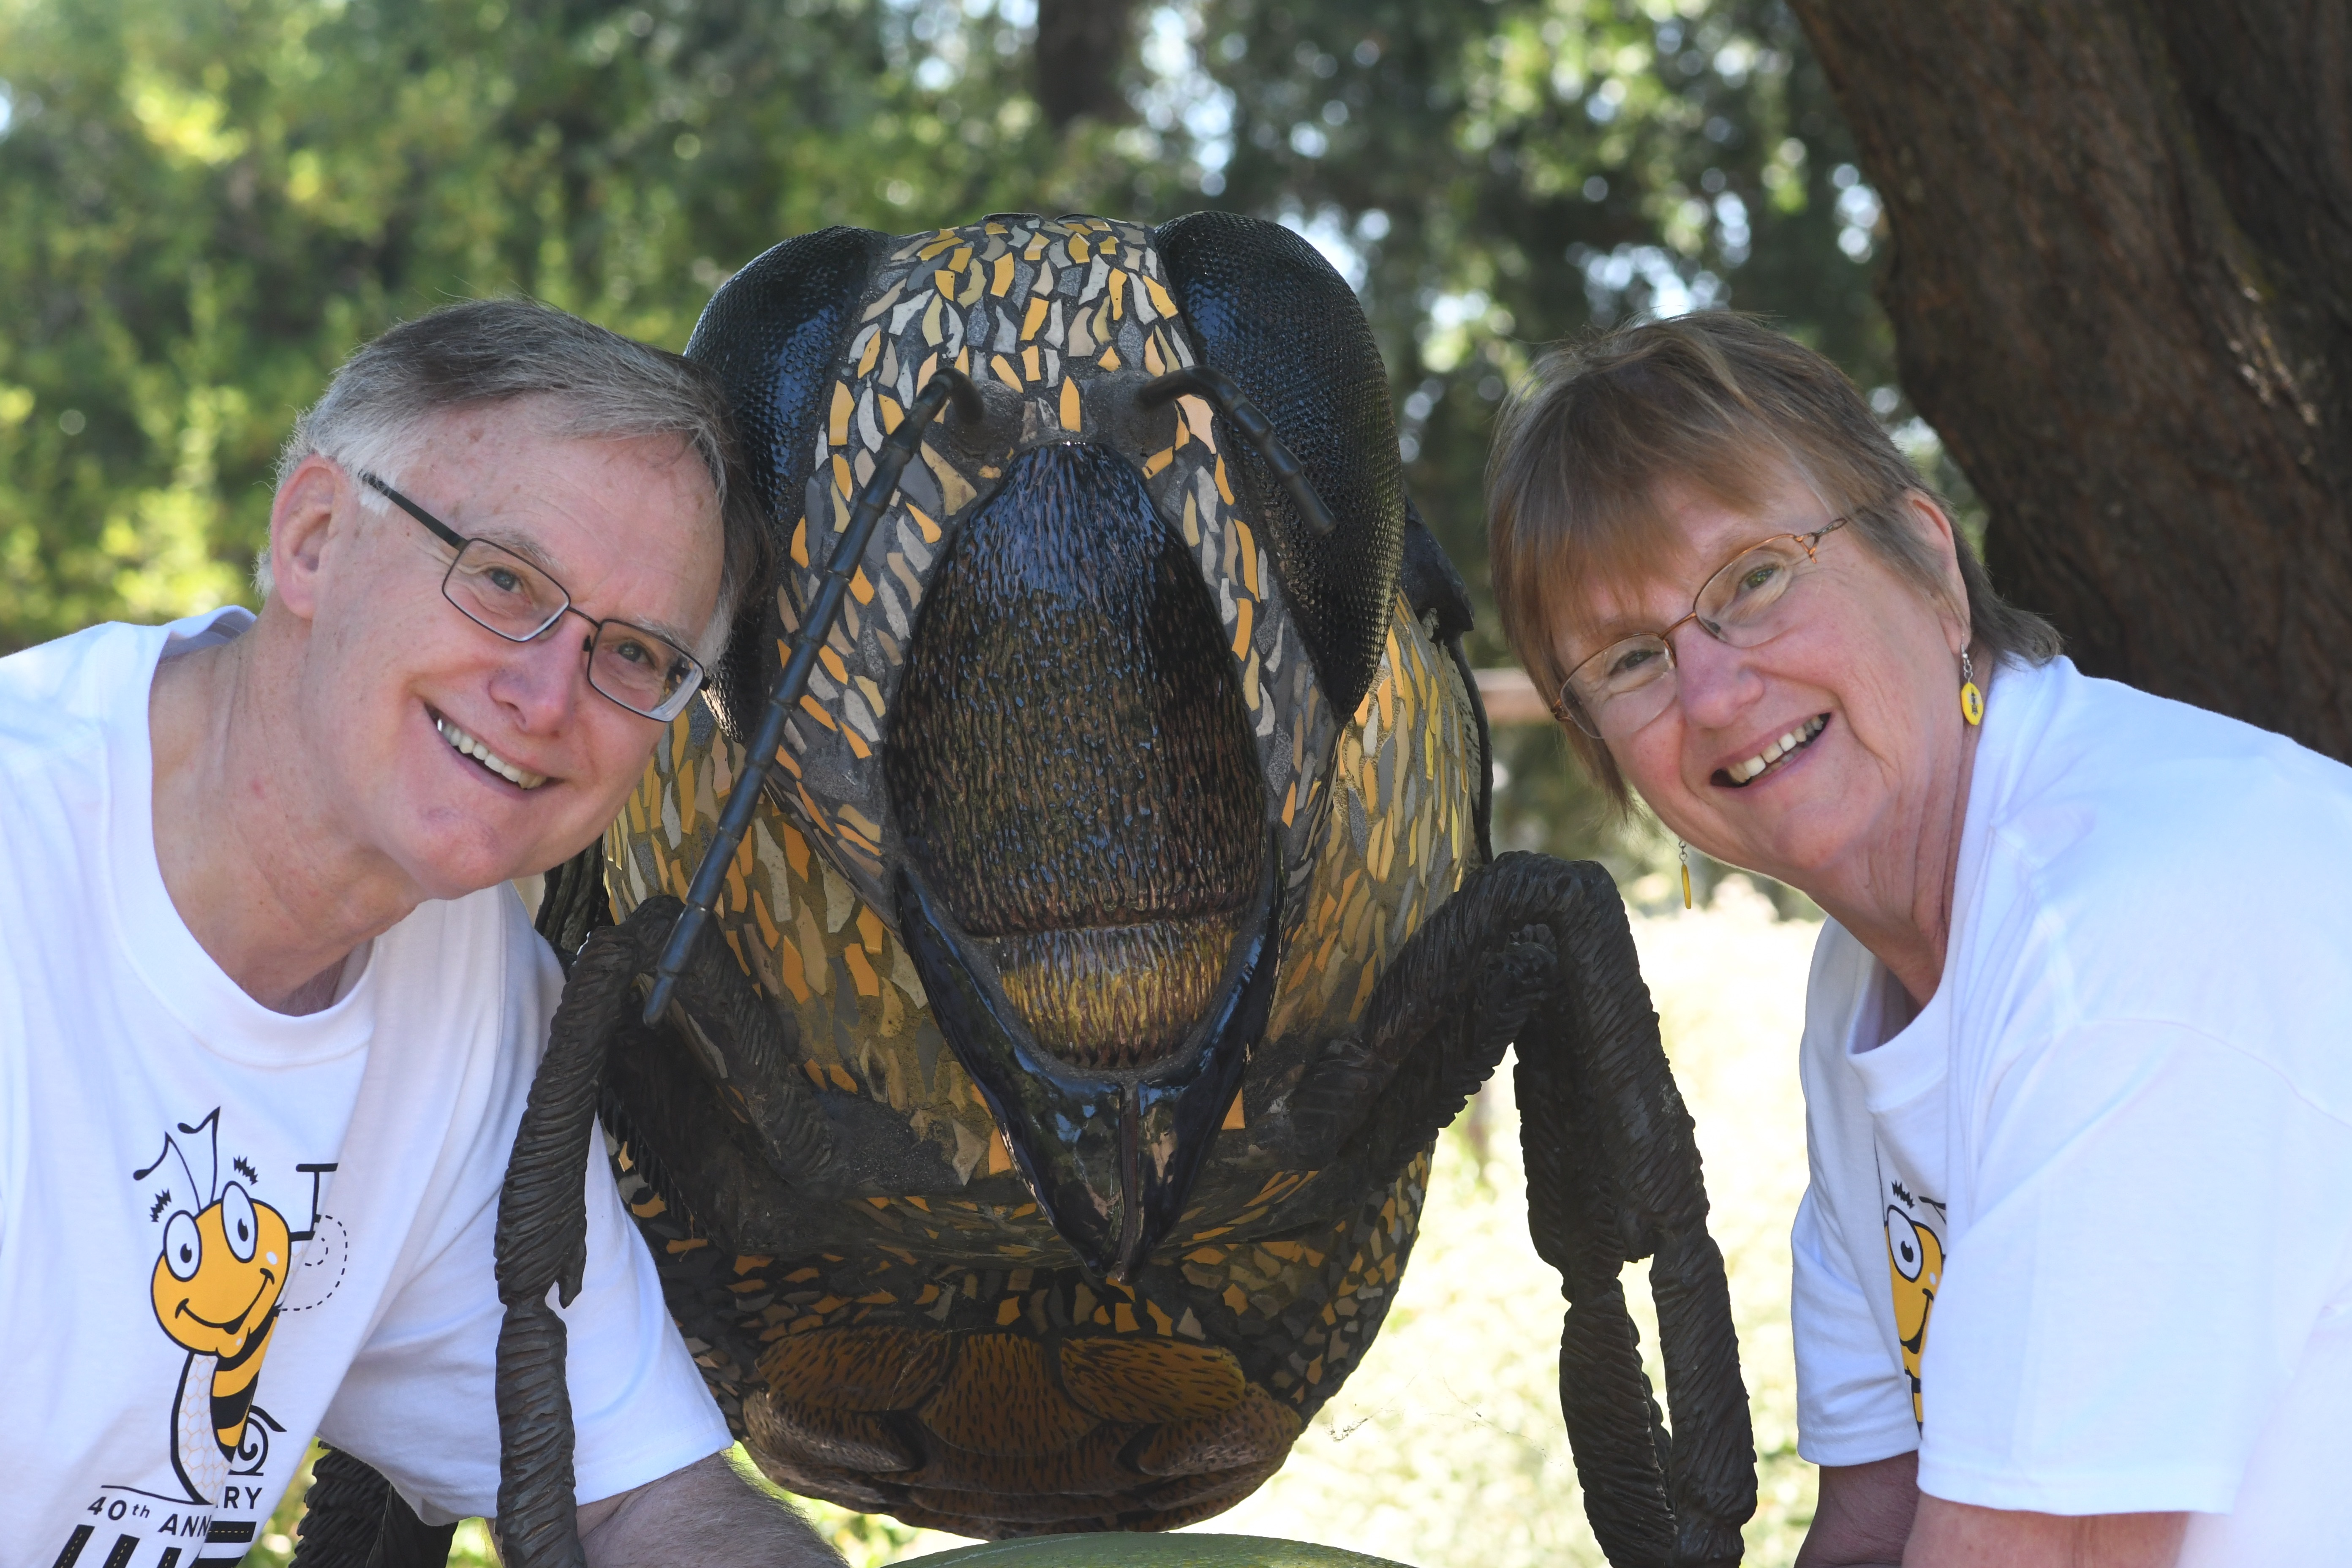 Eric Mussen and his wife, Helen, pose in front of Miss Bee Haven, a sculpture created by artist Donna Billick of Davis in the UC Davis Bee Haven. This image was taken in 2017 when the Western Apicultural Society met at UC Davis for its 40th anniversary celebration. Mussen was a co-founder of WAS and served six terms as president. (Photo by Kathy Keatley Garvey)